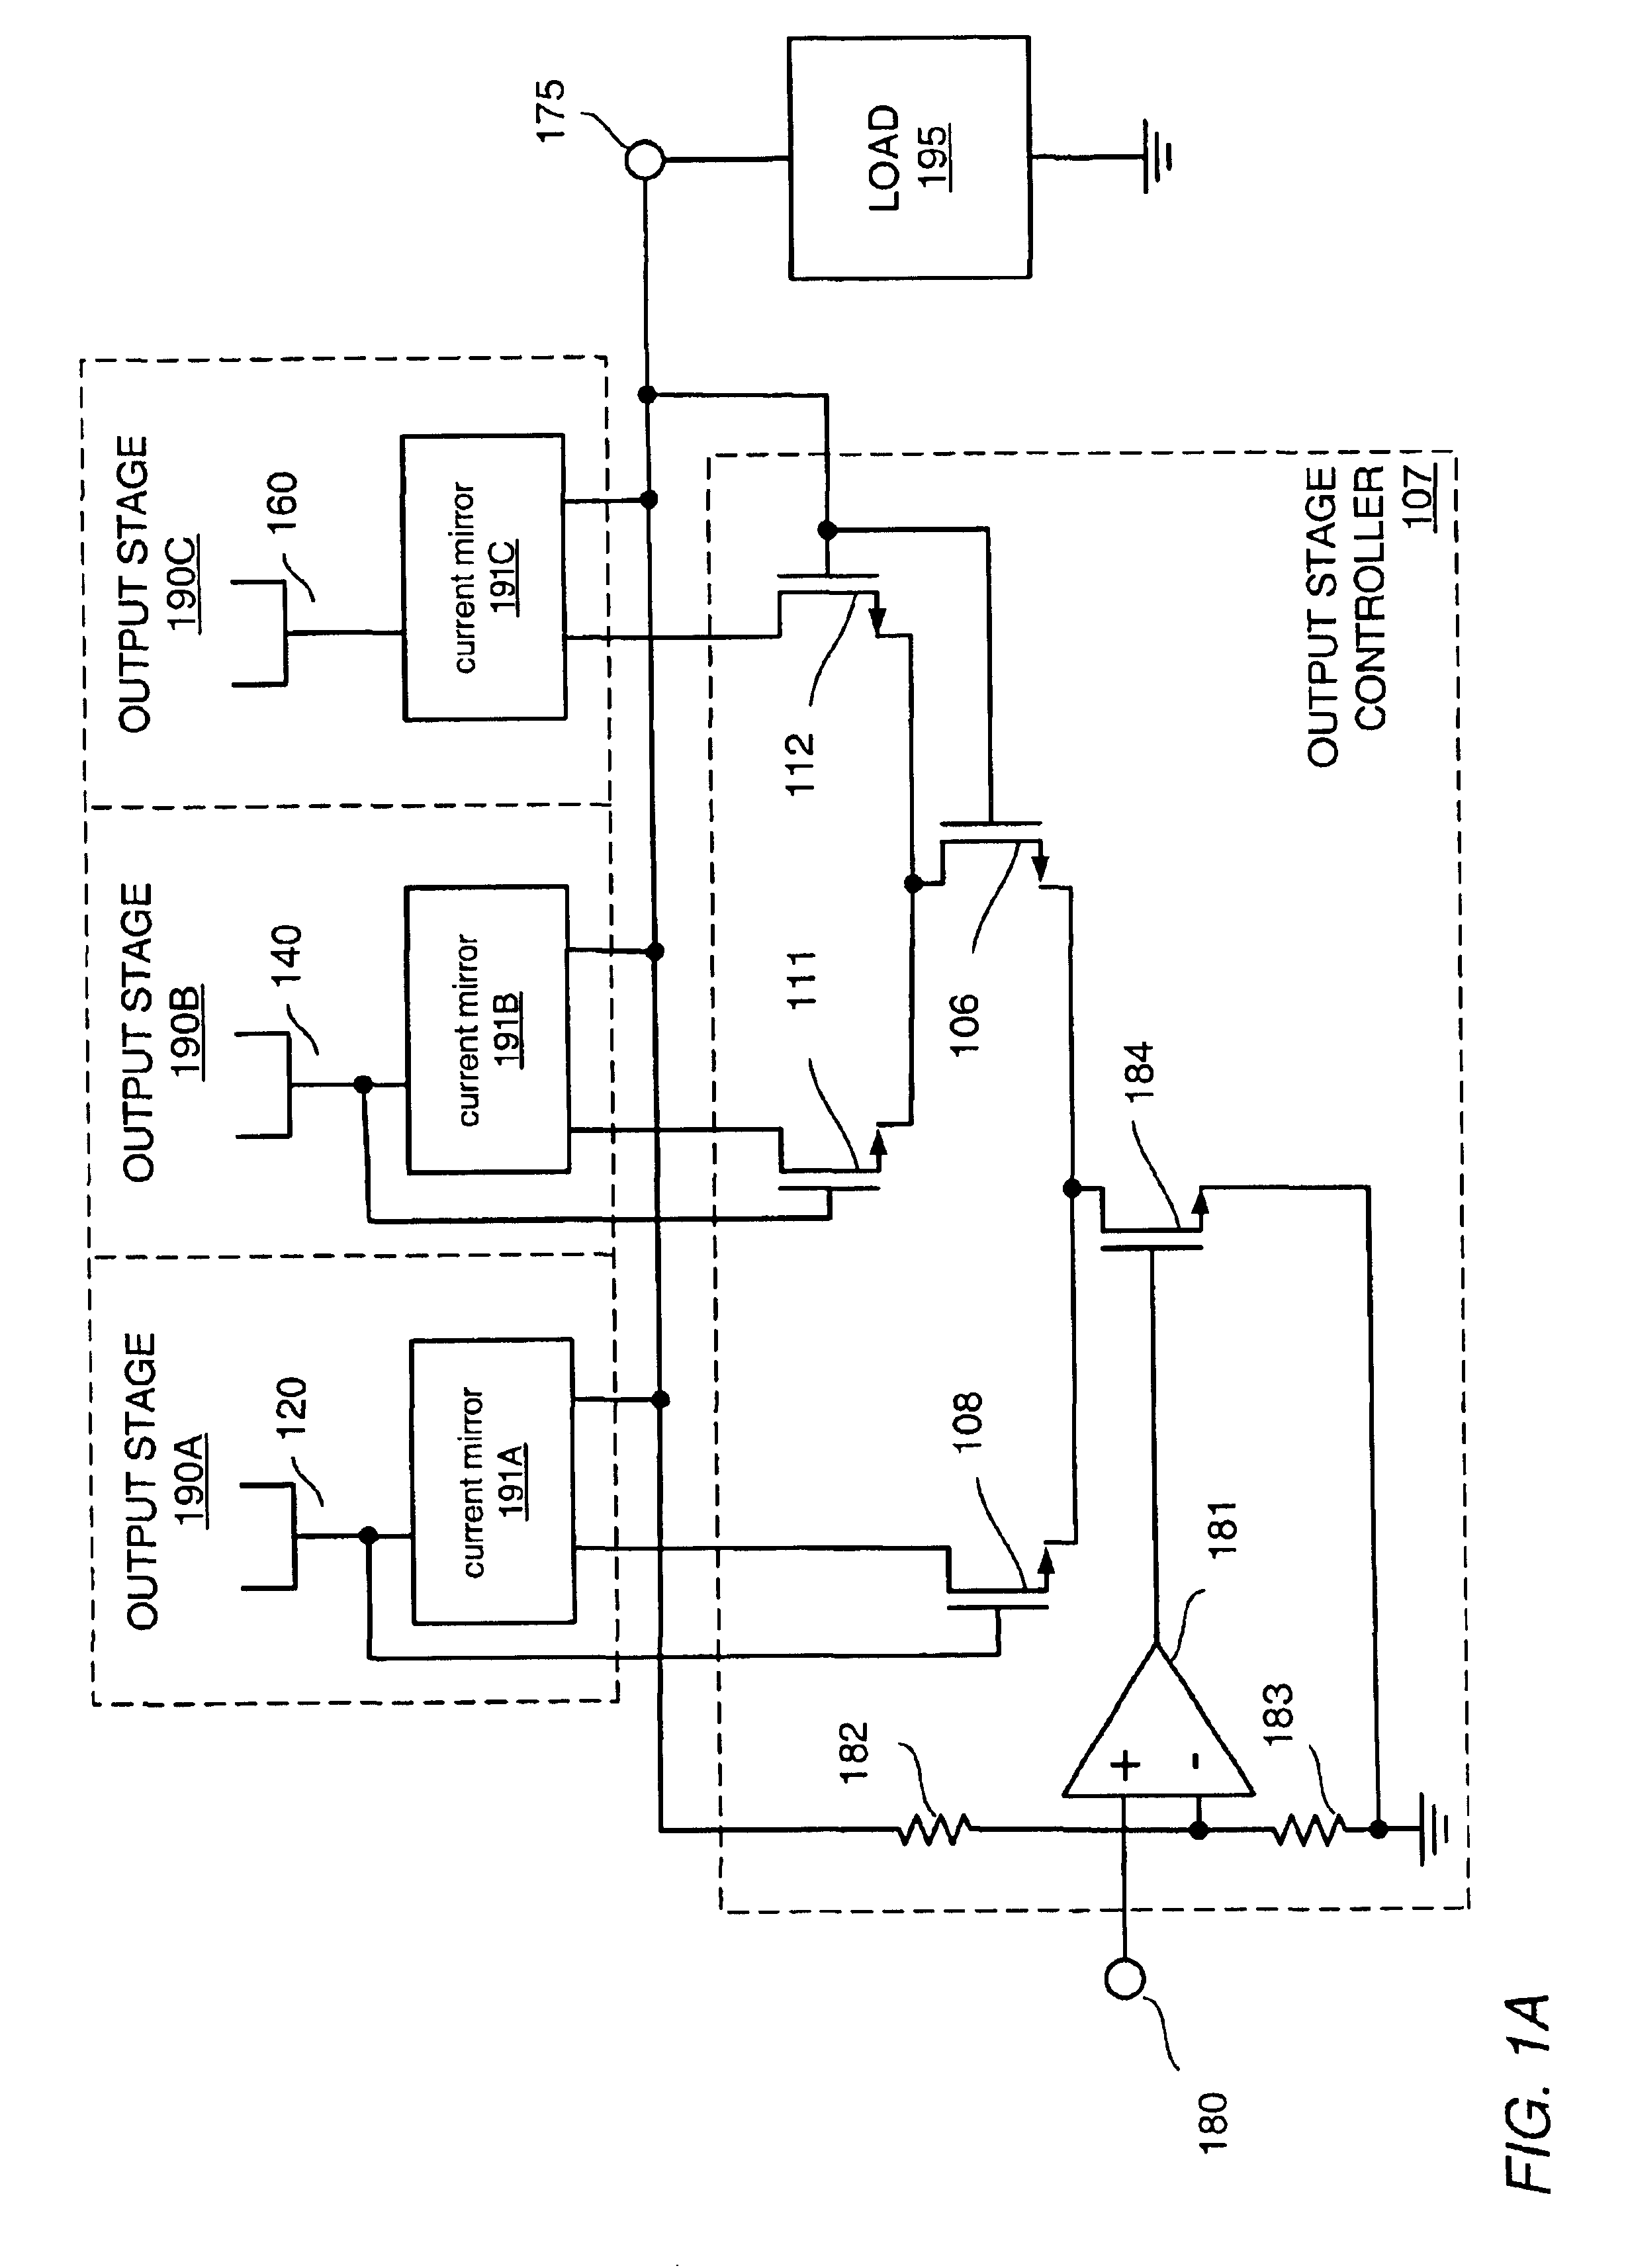 Efficient class-G amplifier with wide output voltage swing